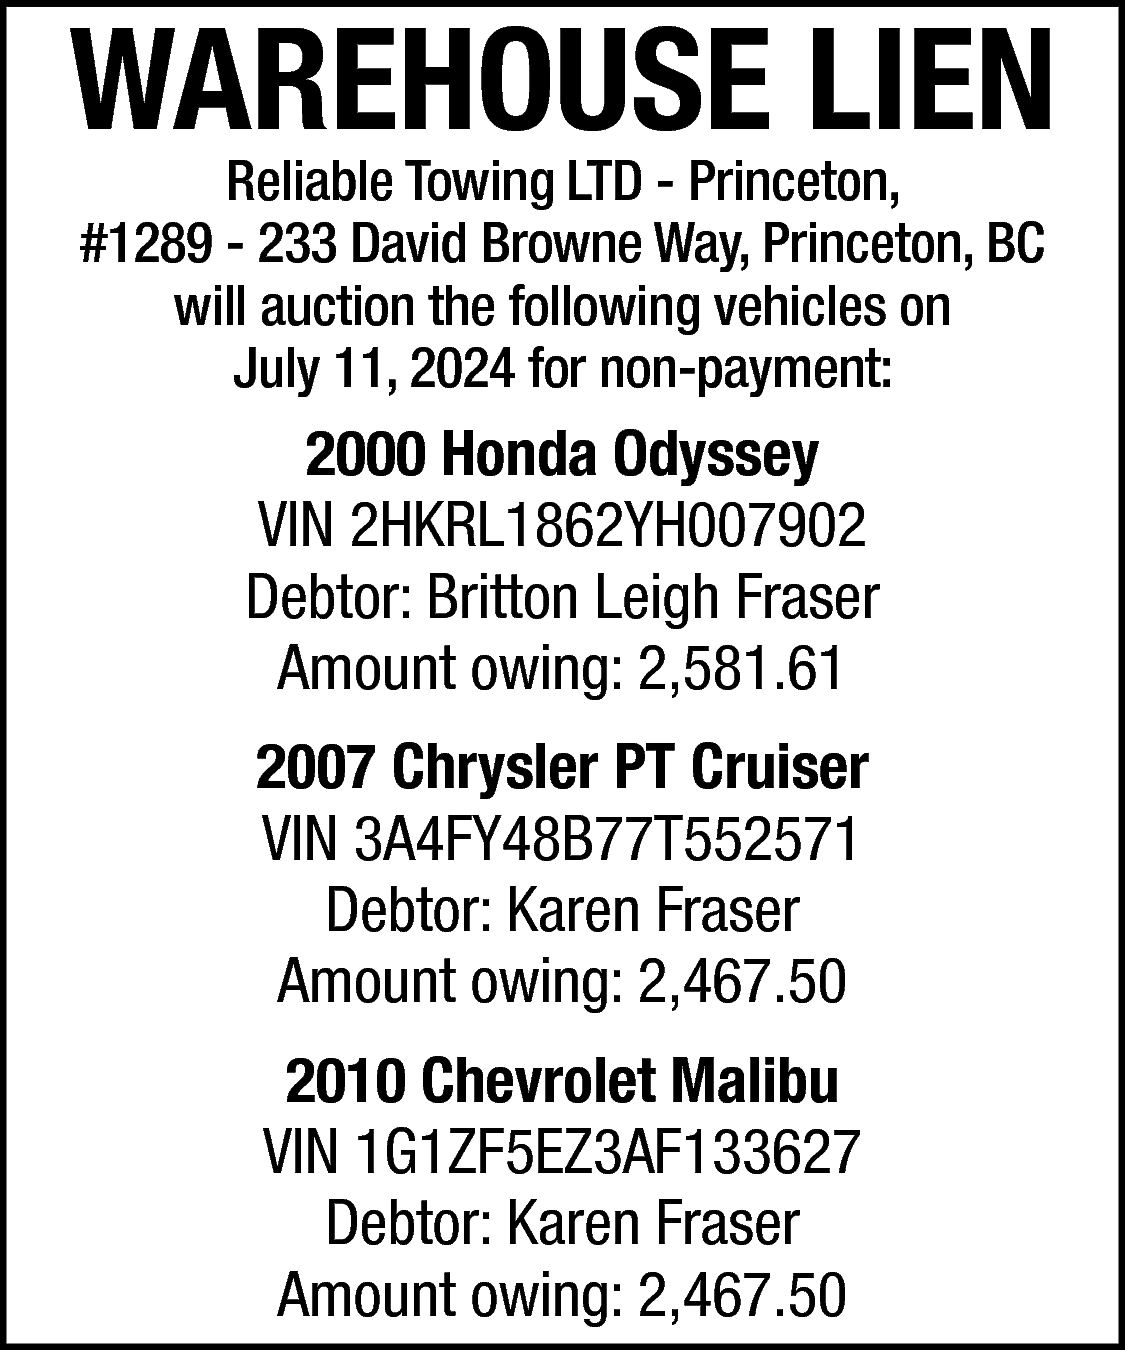 WAREHOUSE LIEN <br>Reliable Towing LTD  WAREHOUSE LIEN  Reliable Towing LTD - Princeton,  #1289 - 233 David Browne Way, Princeton, BC  will auction the following vehicles on  July 11, 2024 for non-payment:    2000 Honda Odyssey  VIN 2HKRL1862YH007902  Debtor: Britton Leigh Fraser  Amount owing: 2,581.61  2007 Chrysler PT Cruiser  VIN 3A4FY48B77T552571  Debtor: Karen Fraser  Amount owing: 2,467.50  2010 Chevrolet Malibu  VIN 1G1ZF5EZ3AF133627  Debtor: Karen Fraser  Amount owing: 2,467.50    